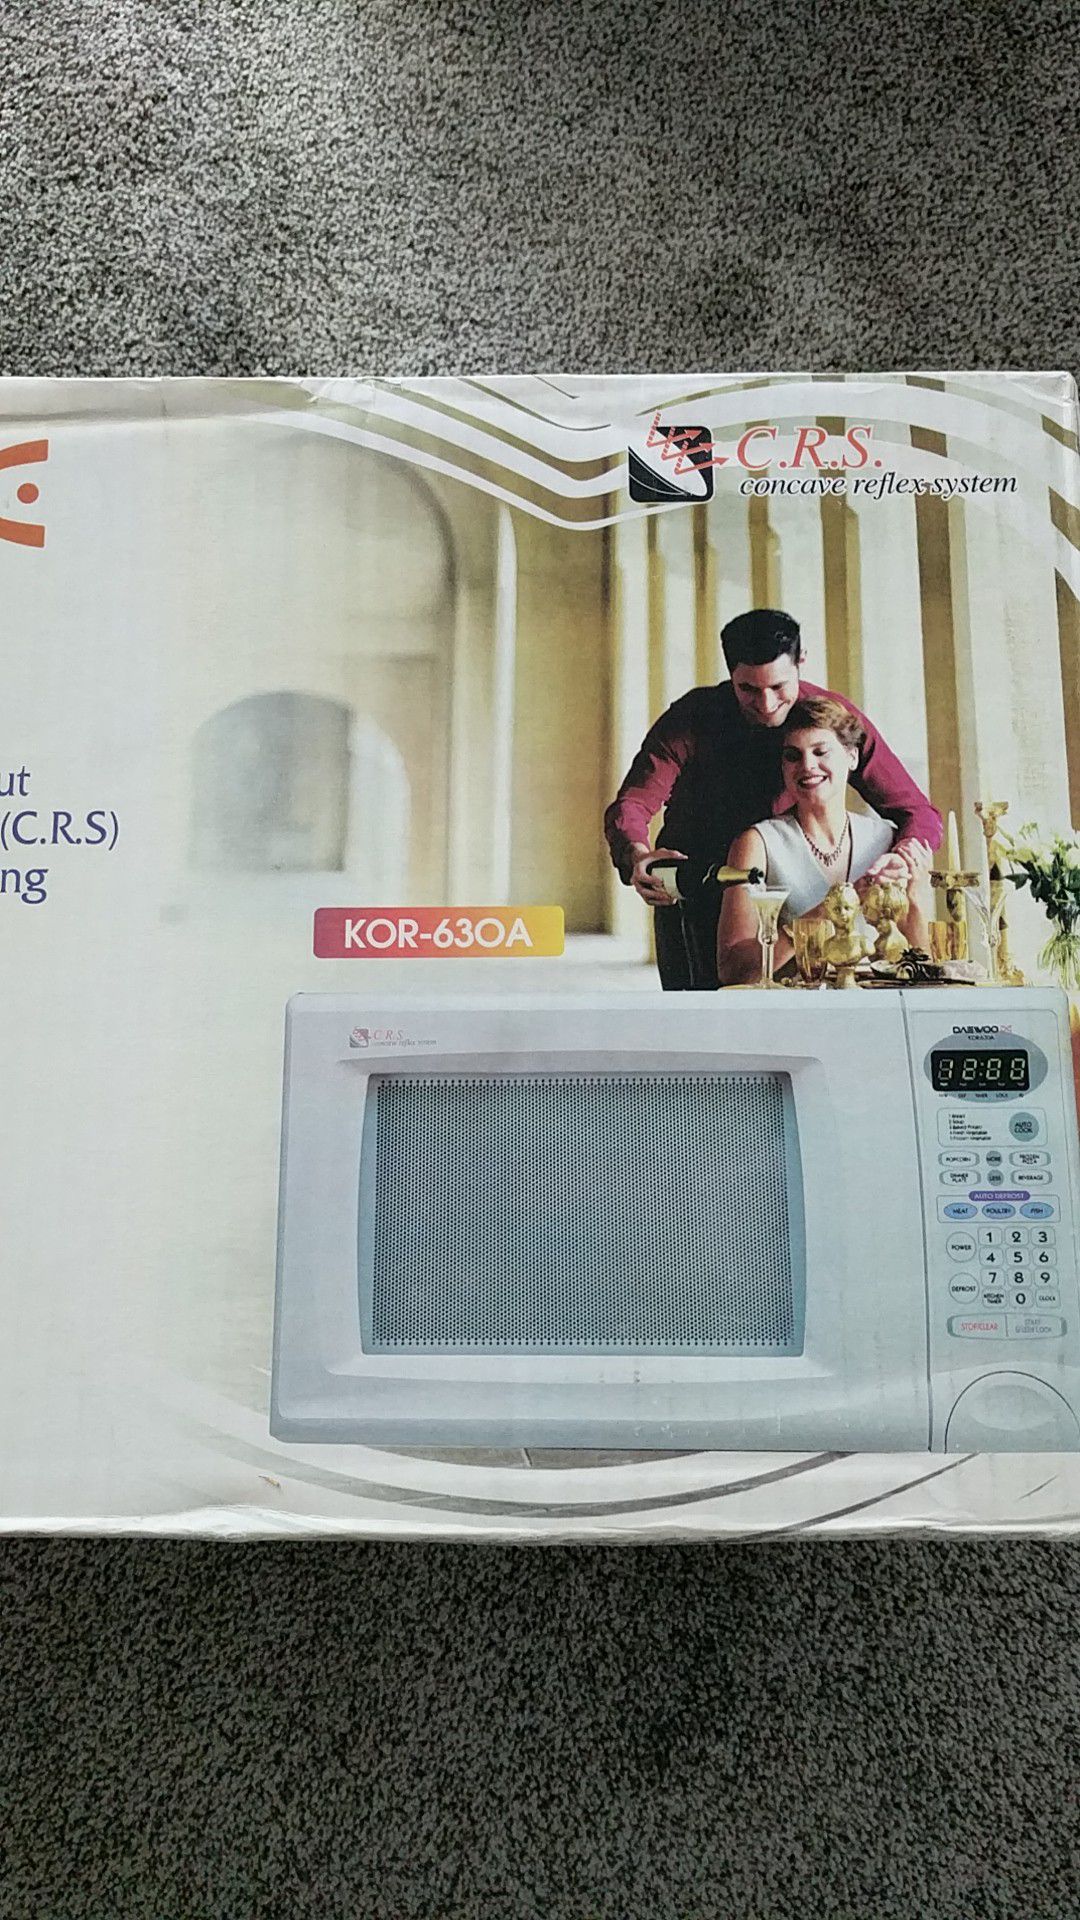 Daewoo KOR630A 800W Compact Microwave Oven - White